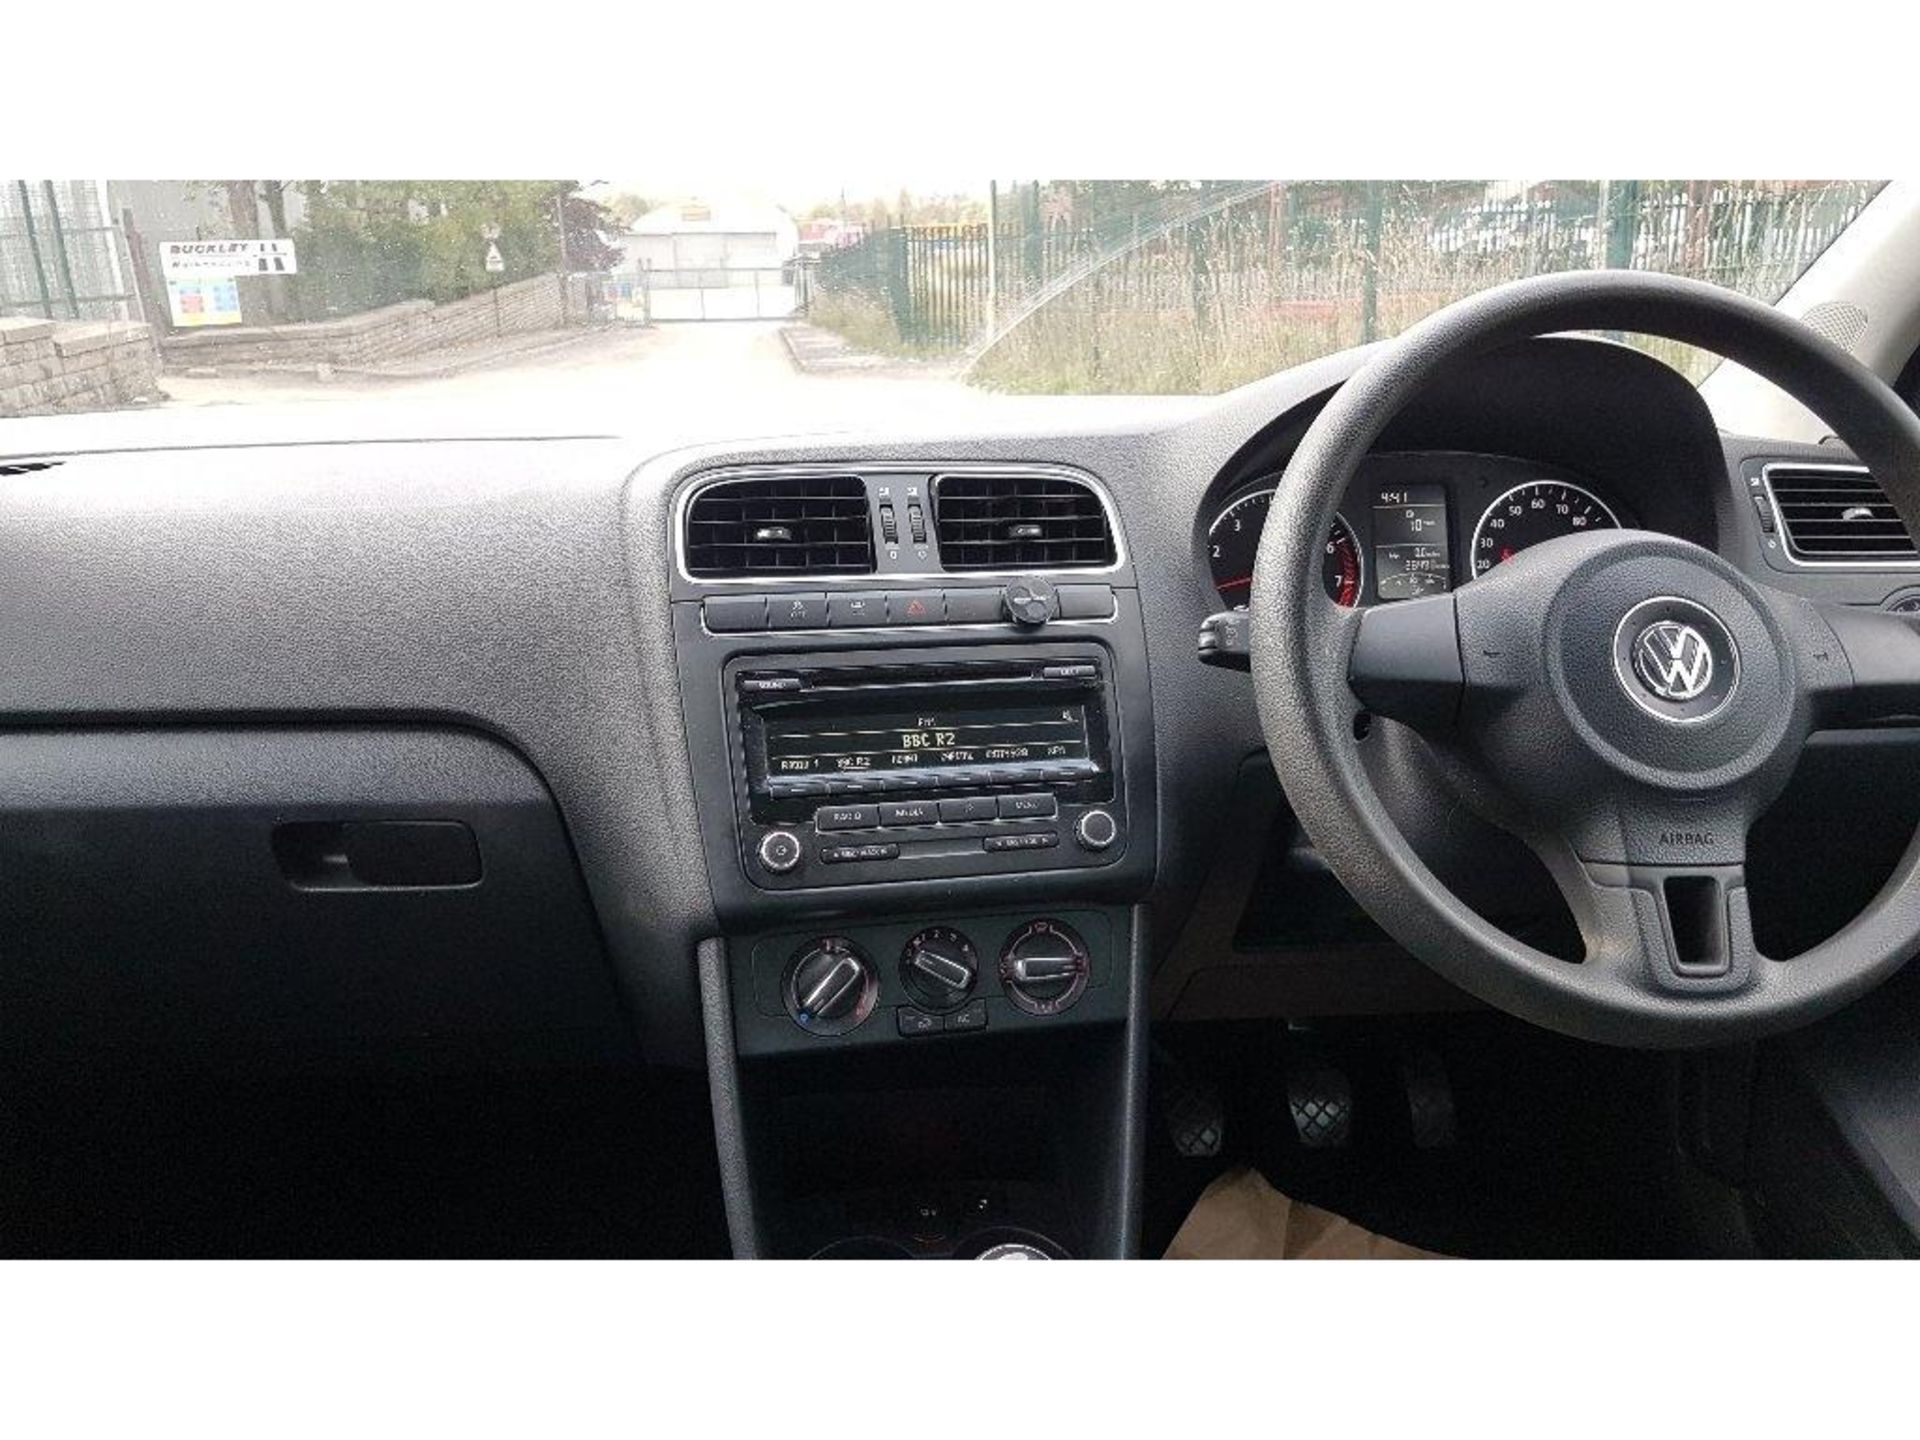 VOLKSWAGEN POLO 1.2 MATCH EDITION 5DR, FT13 HHY, 20.05.2013, PETROL, MILEAGE 28,499, MANUAL, 1.2L, 2 - Image 11 of 19